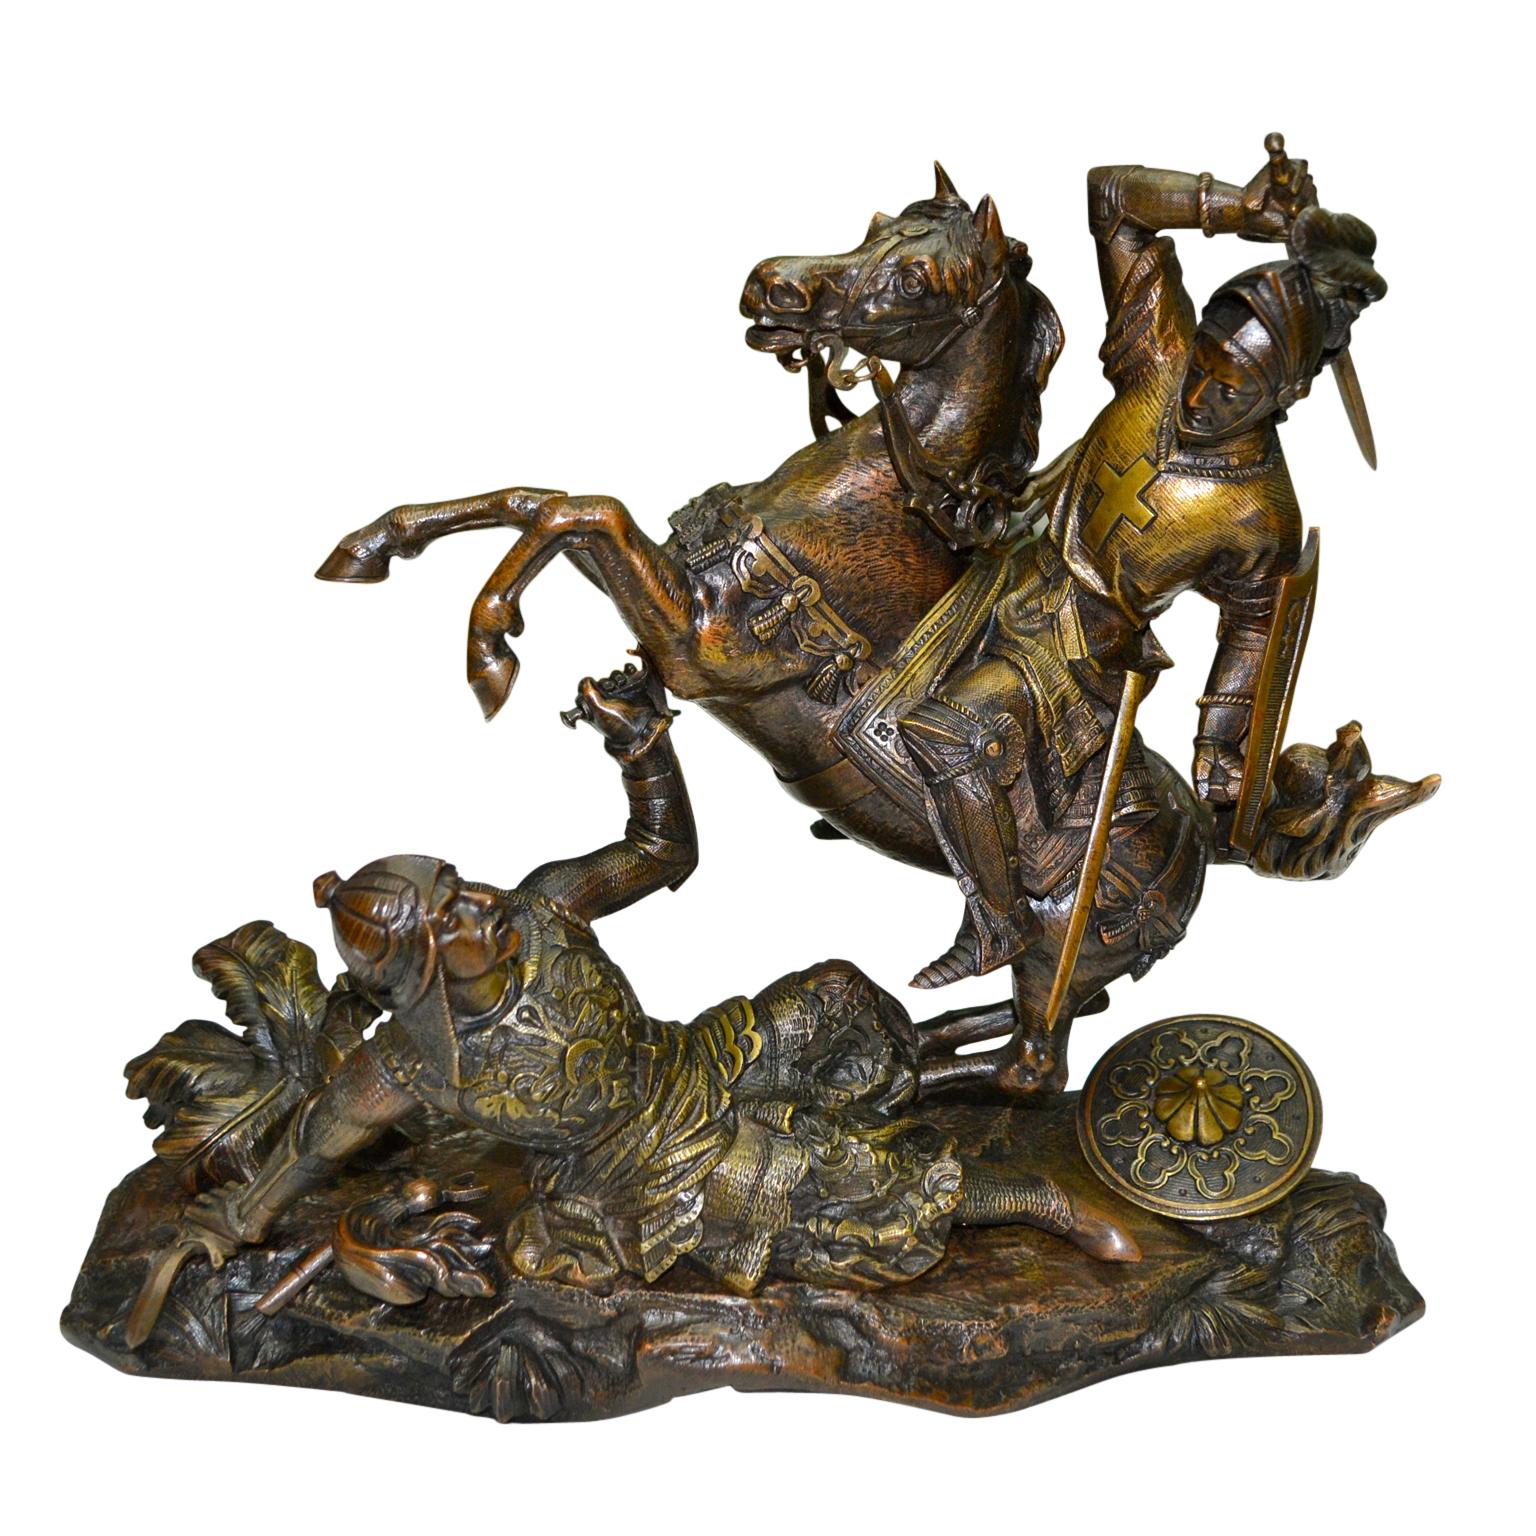 A rare and  a highly charged late 19 century unsigned sculpture in finely chiselled bronze of  the medieval Frankish  king Charles Martel  in full armour on his rearing battle horse with one hand aloft wielding a swordready to strike the mortal  to